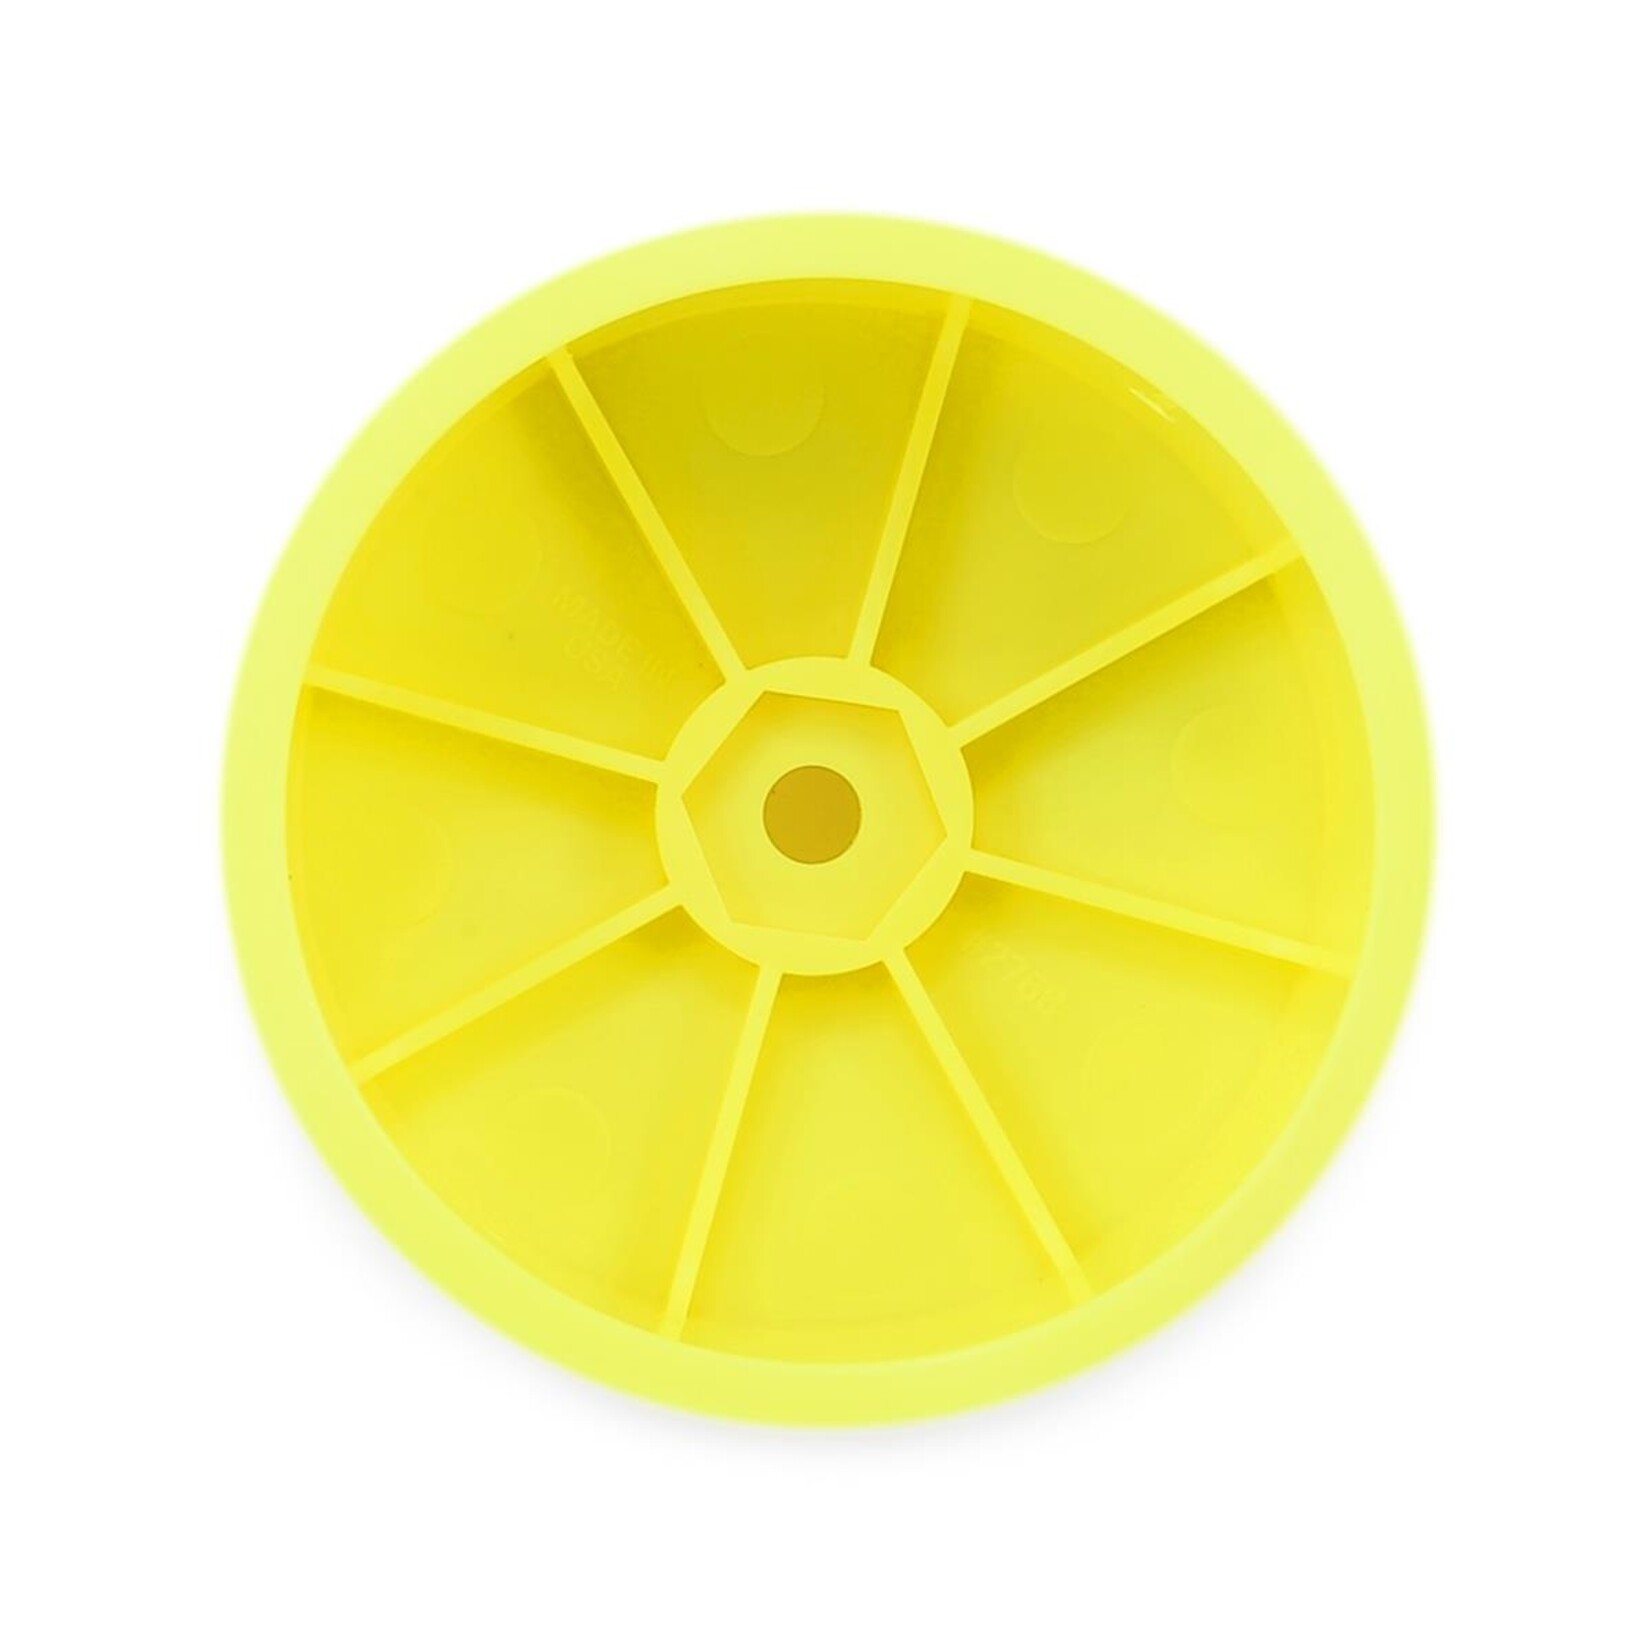 Pro-Line Pro-Line Velocity VTR 2.2" 4WD Front Buggy Wheels (2) (Yellow) (B64) w/12mm Hex #2768-02